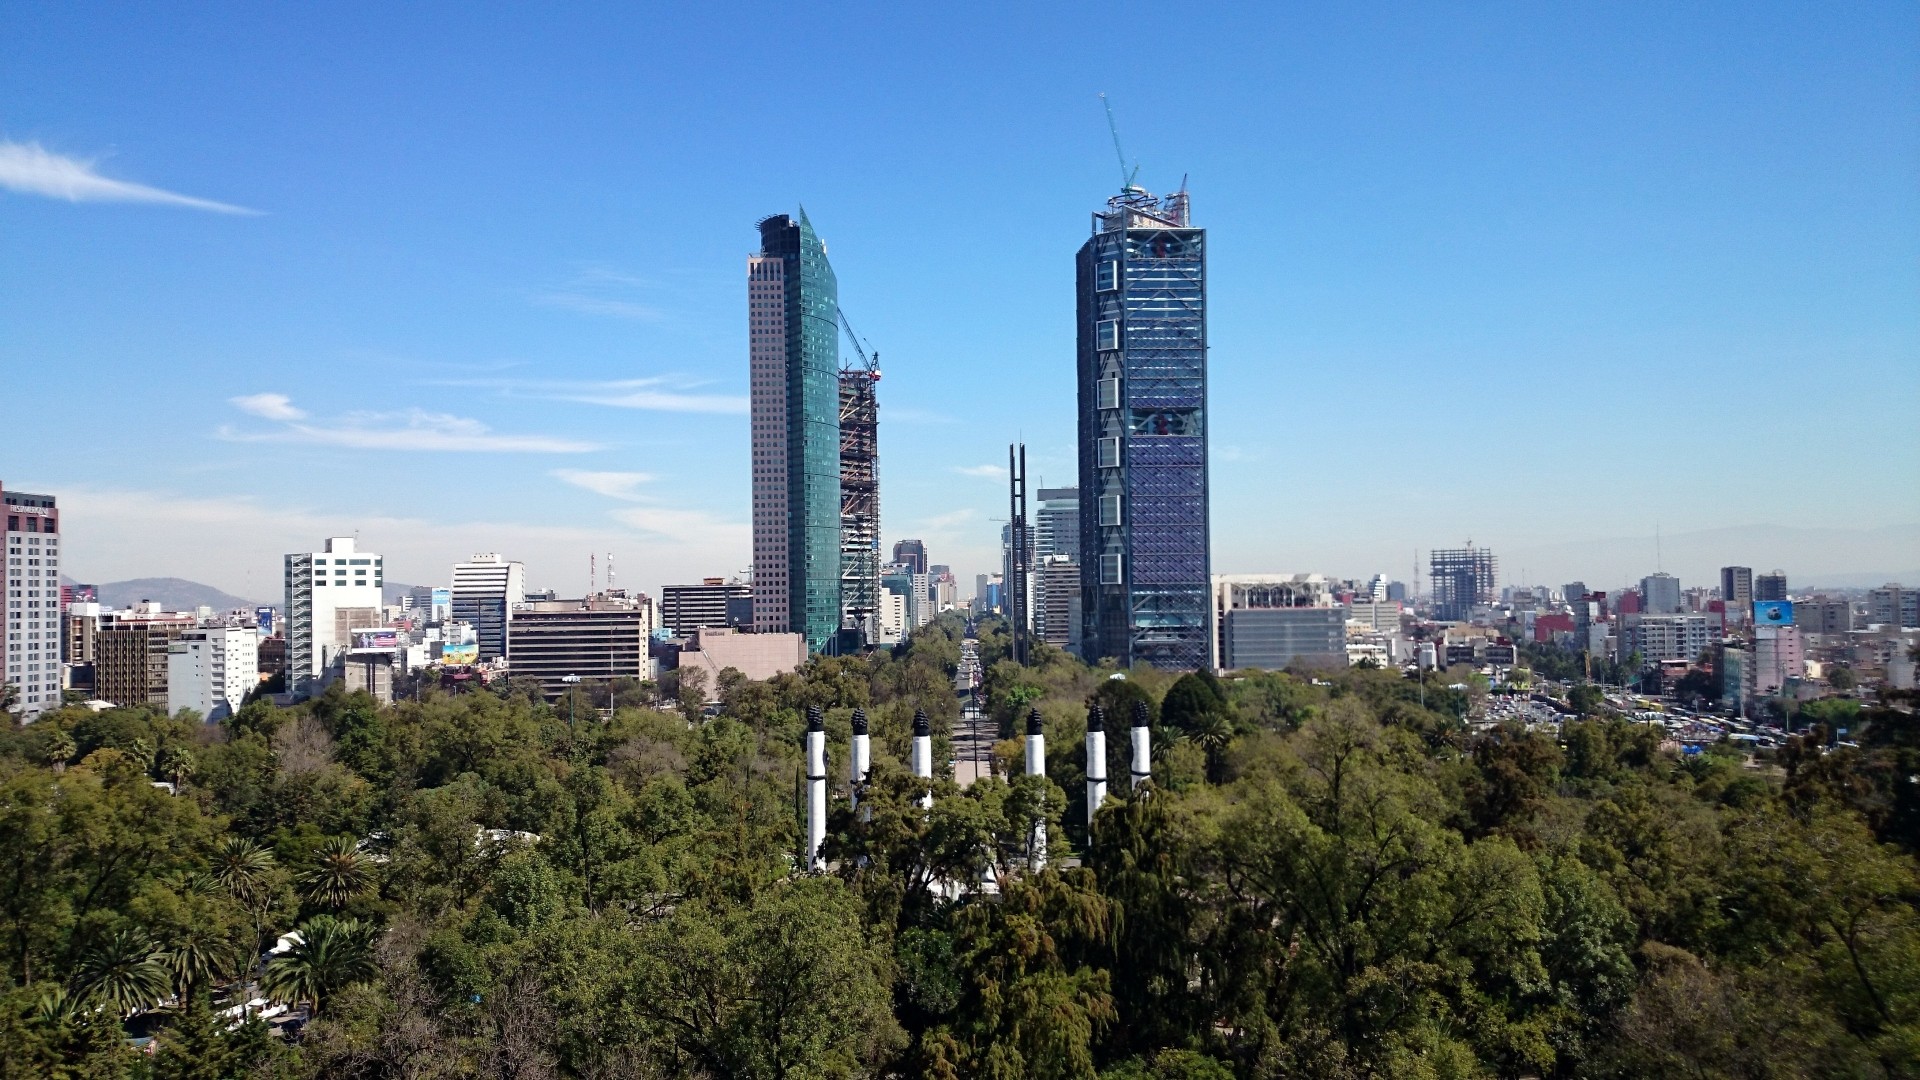 1920x1080 Quality Mexico City Wallpapers Cities 3840x2160. Download resolutions:  Desktop:  ...